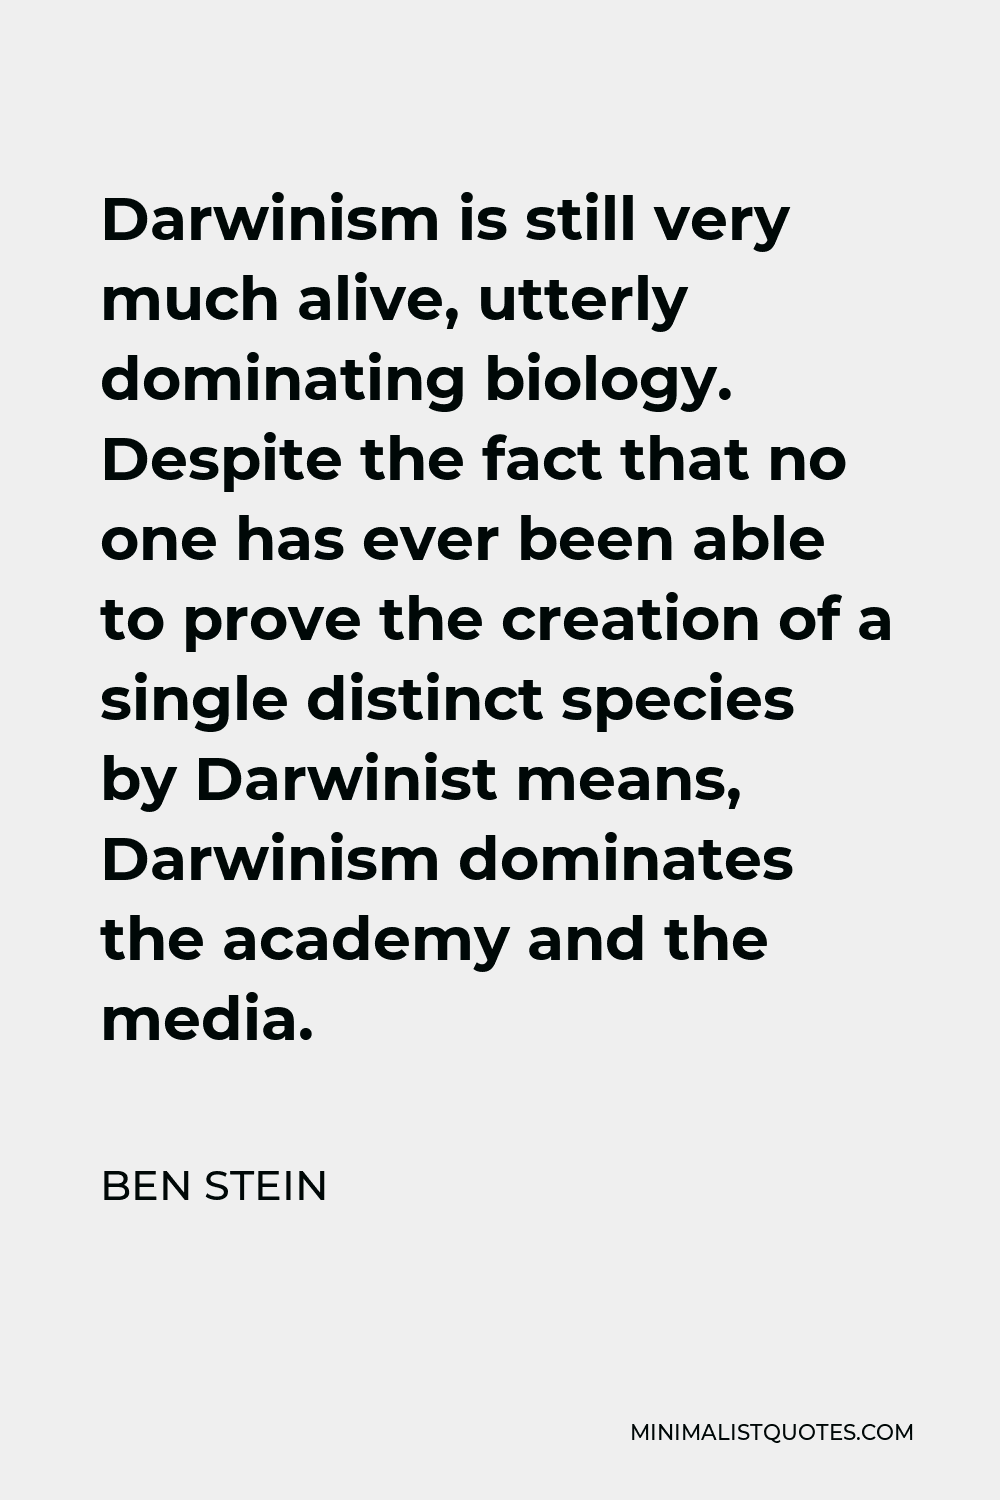 Ben Stein Quote - Darwinism is still very much alive, utterly dominating biology. Despite the fact that no one has ever been able to prove the creation of a single distinct species by Darwinist means, Darwinism dominates the academy and the media.